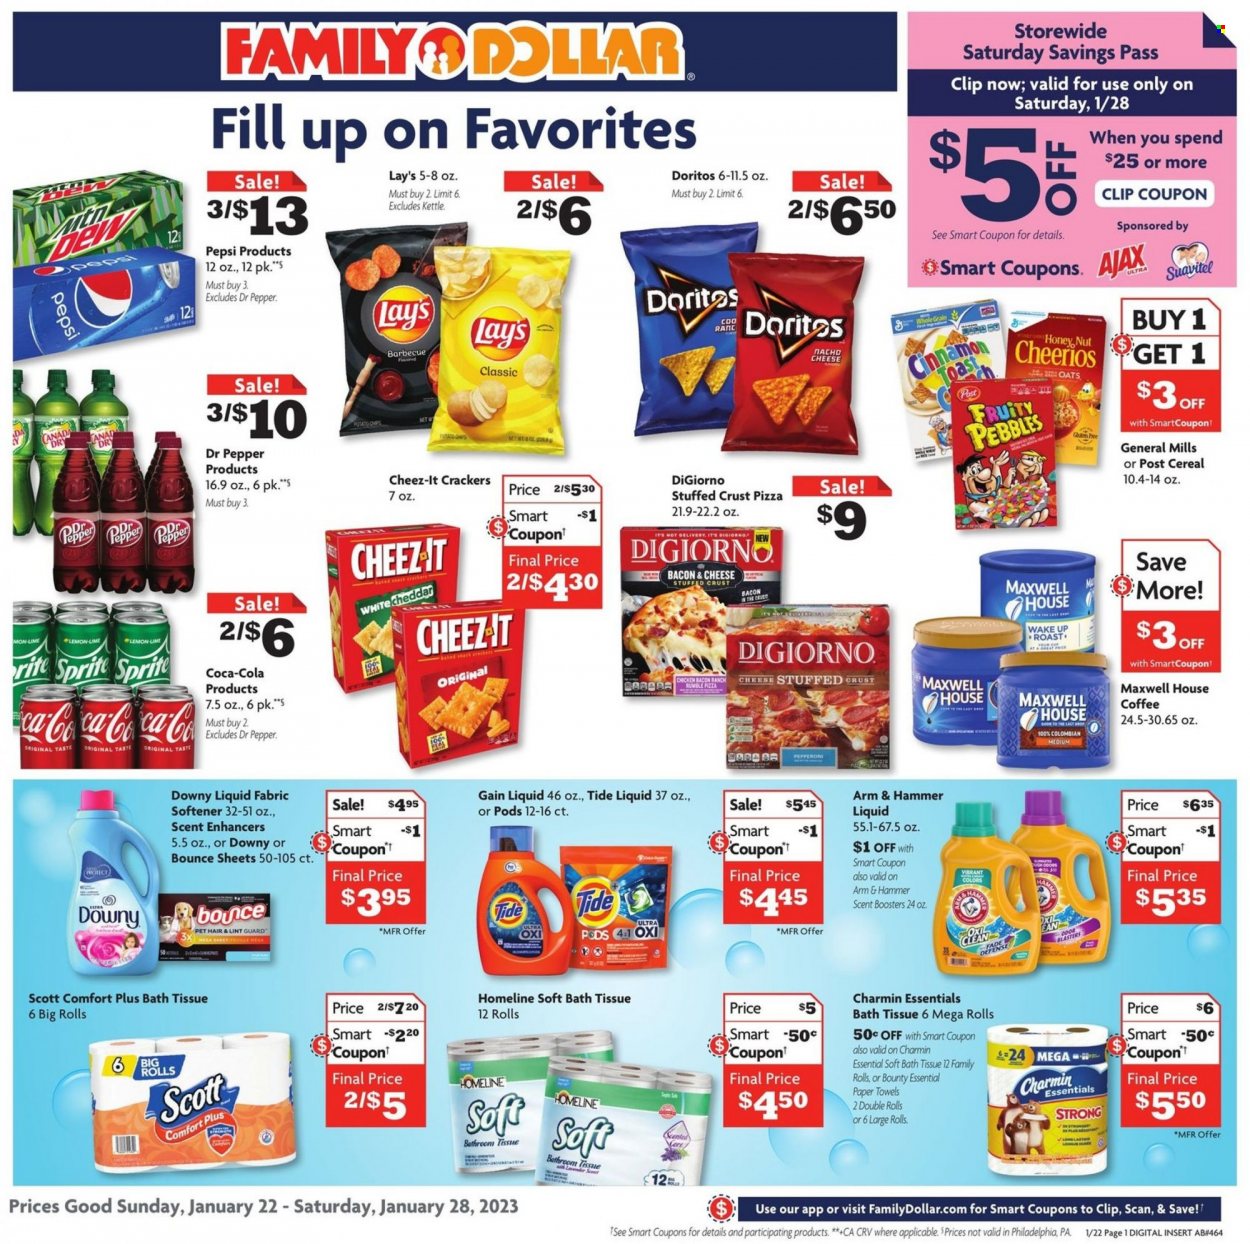 thumbnail - Family Dollar Flyer - 01/22/2023 - 01/28/2023 - Sales products - pizza, bacon, pepperoni, snack, Bounty, crackers, Doritos, chips, Lay’s, Cheez-It, ARM & HAMMER, oats, cereals, Cheerios, Fruity Pebbles, cinnamon, Canada Dry, Coca-Cola, Sprite, Pepsi, Dr. Pepper, Maxwell House, coffee, bath tissue, Scott, kitchen towels, paper towels, Charmin, Gain, Ajax, Tide, fabric softener, Bounce, scent booster, Downy Laundry. Page 1.